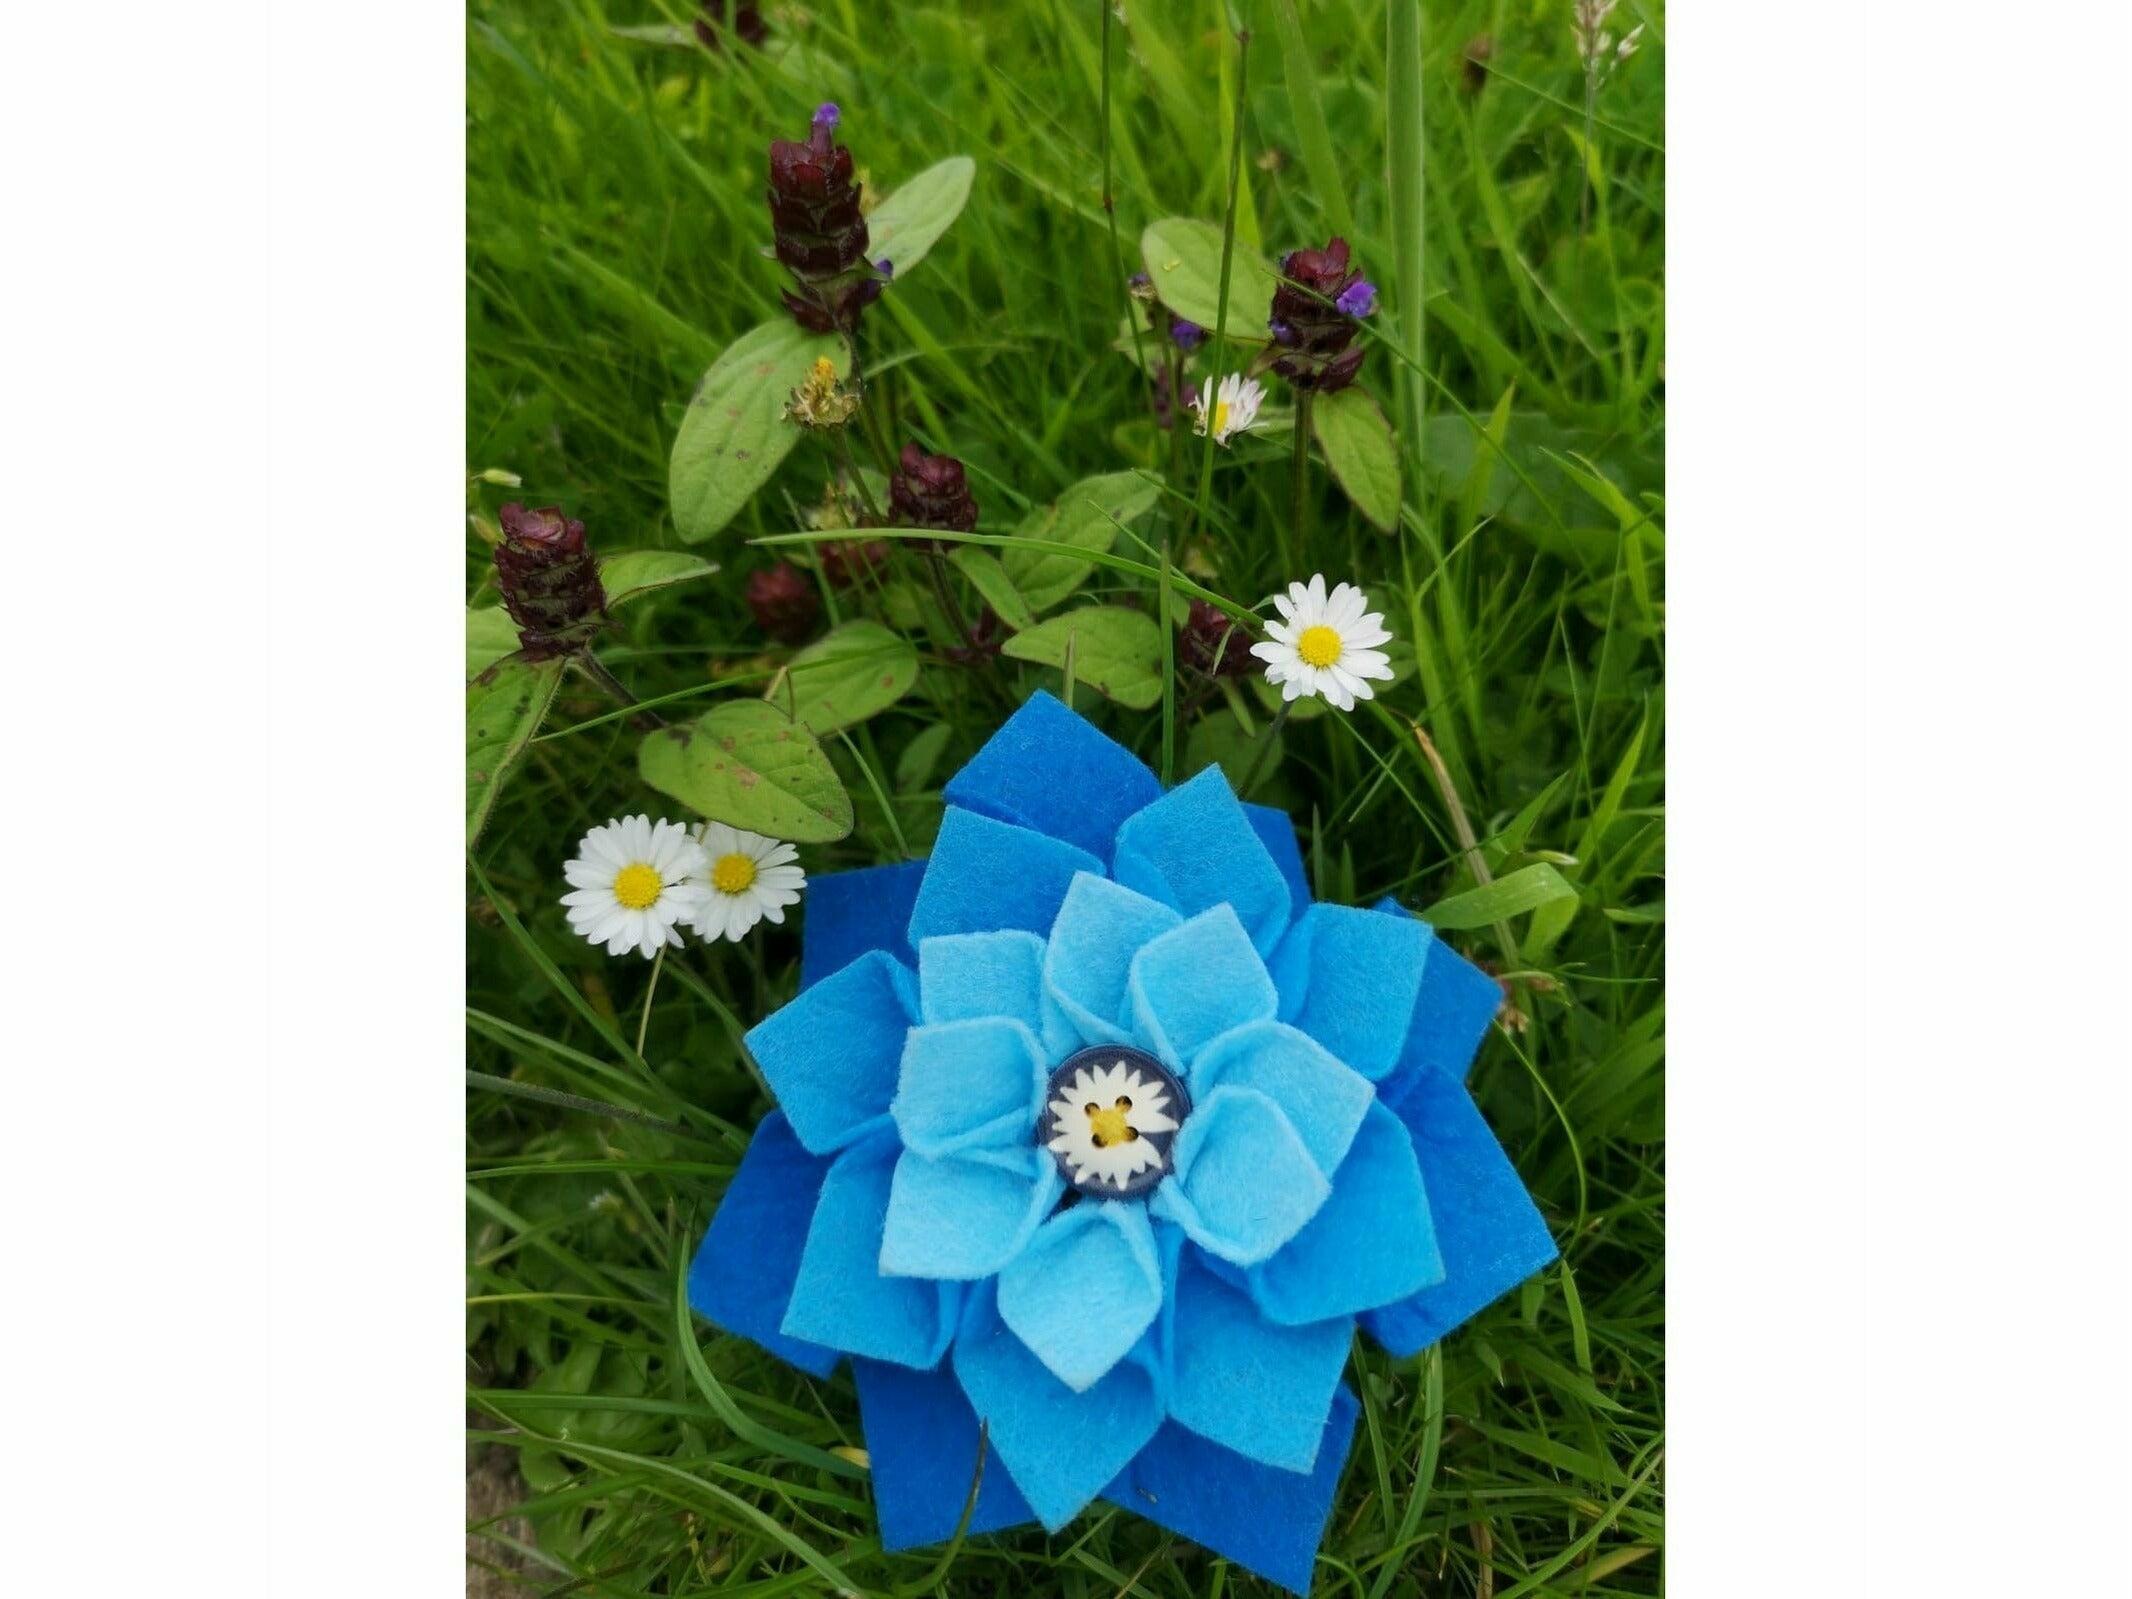 Stunning blue felt bridle charm on a bed of grass surrounded by daisy's